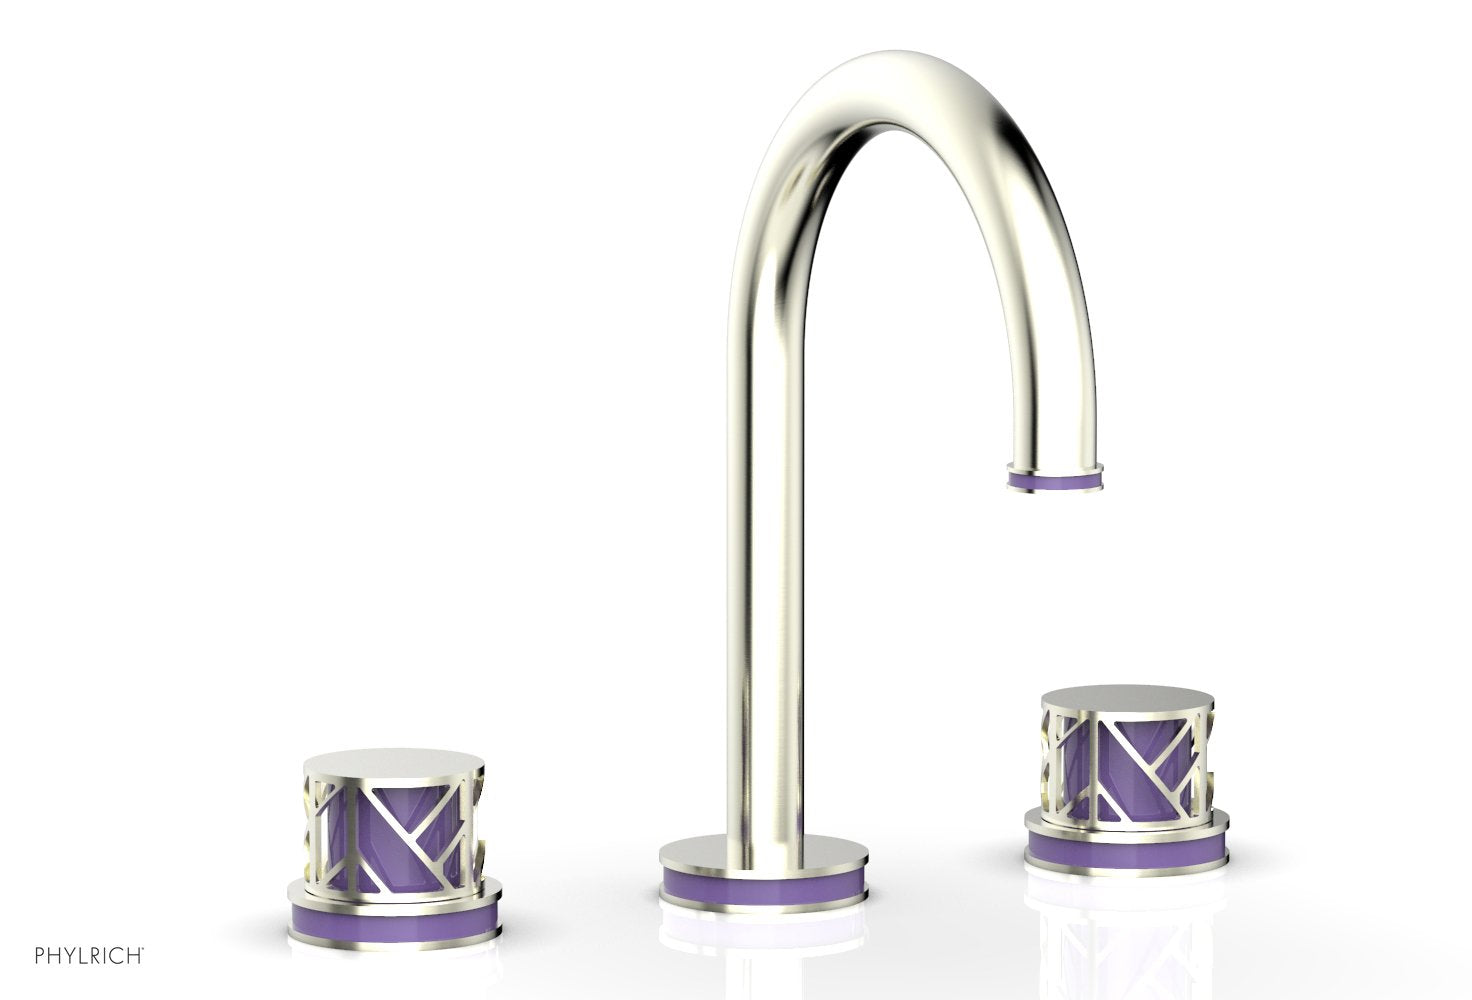 Phylrich JOLIE Widespread Faucet - Round Handles with "Purple" Accents